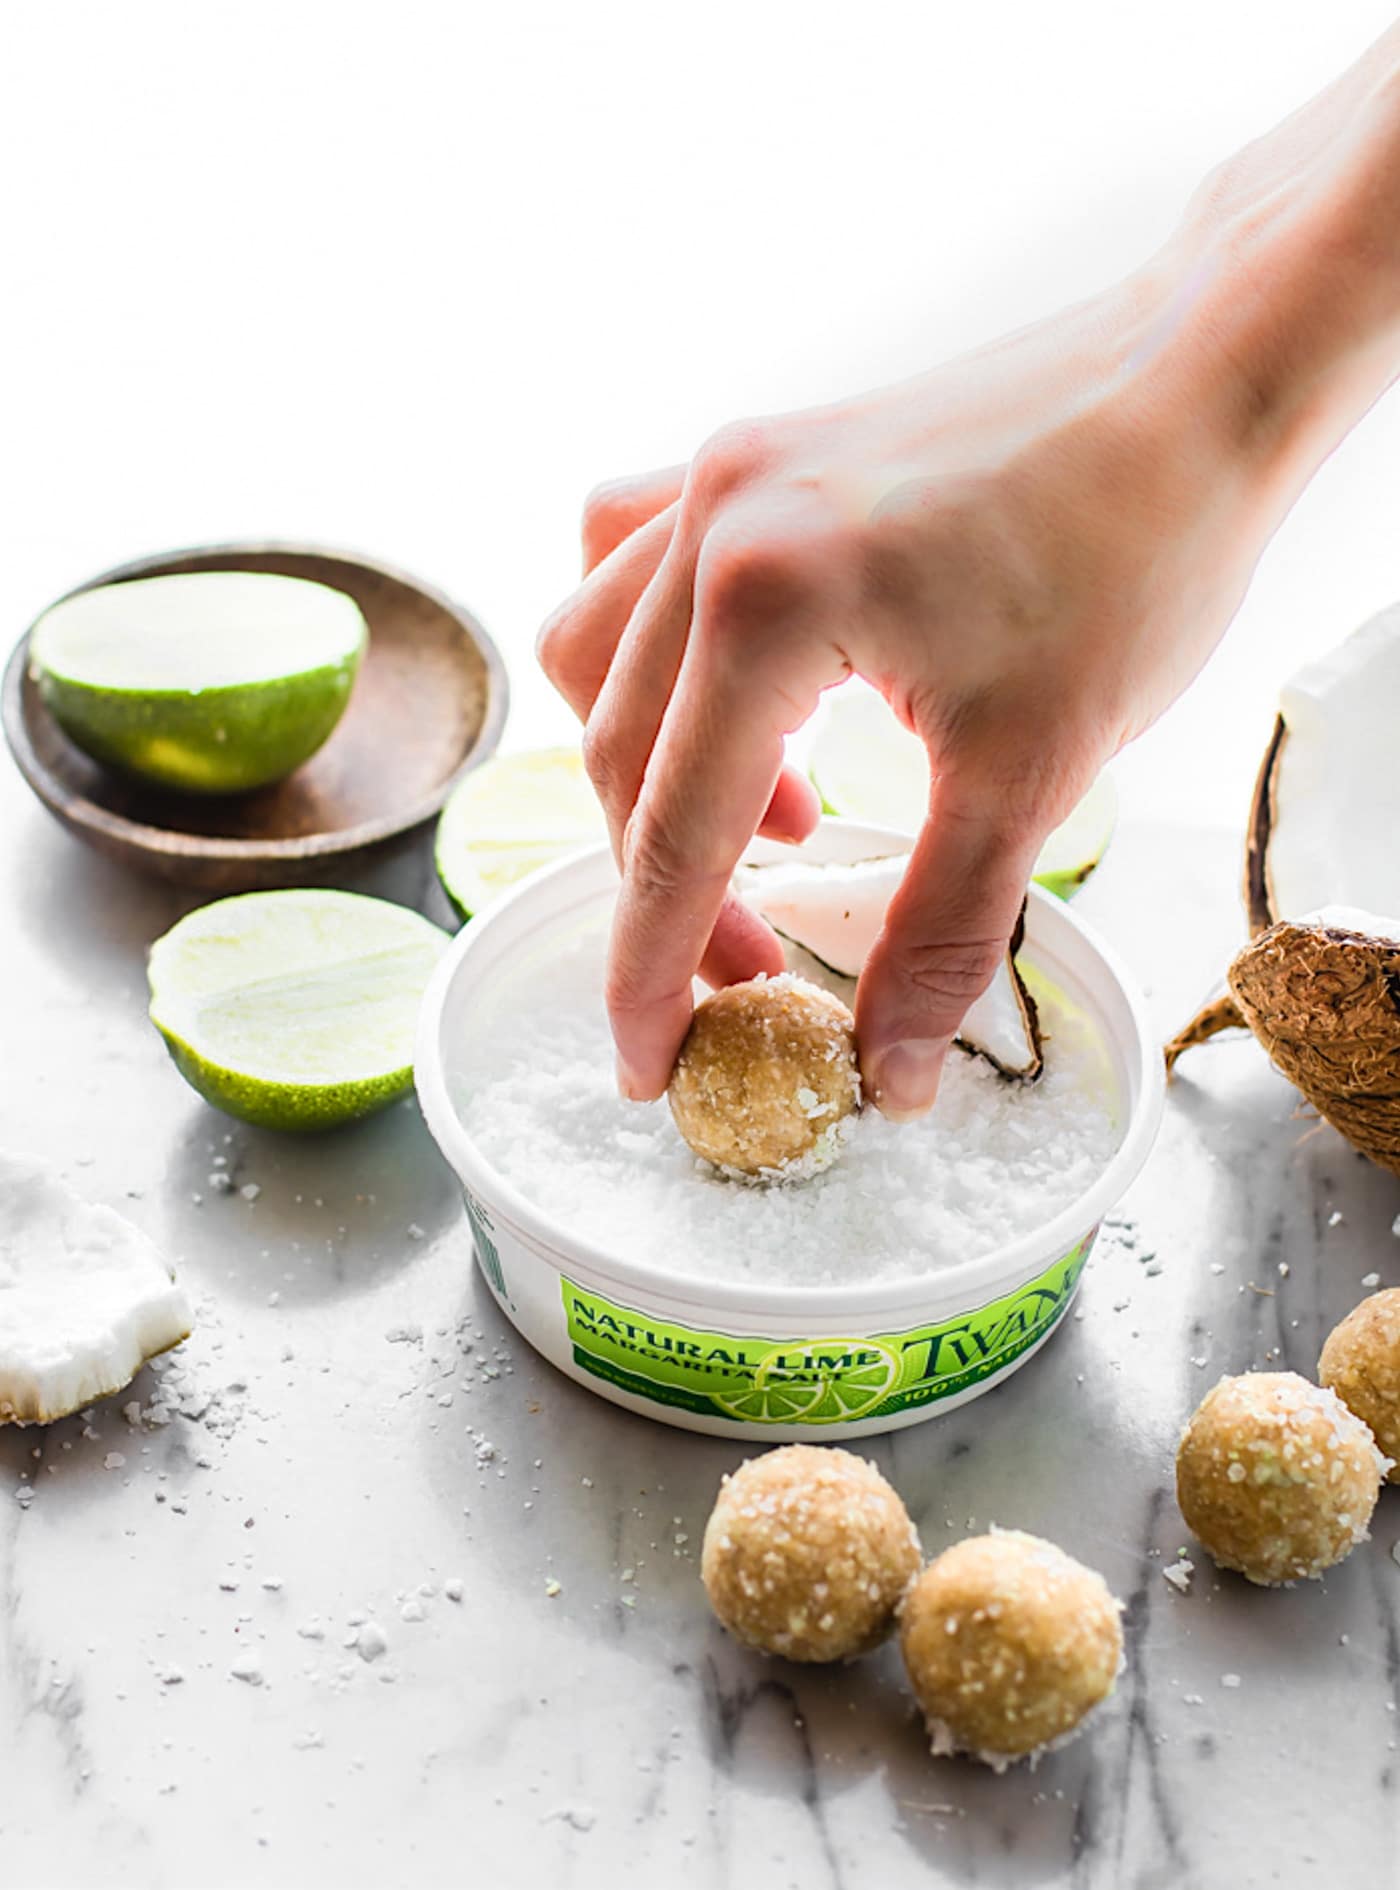 No Bake Coconut Margarita Bites! Super simple no bake coconut margarita treats in dessert bite form! These bites are naturally gluten free, paleo friendly, and vegan! Bites that actually taste like a frozen margarita with natural lime and coconut flavors. #vegan #paleo #nobake